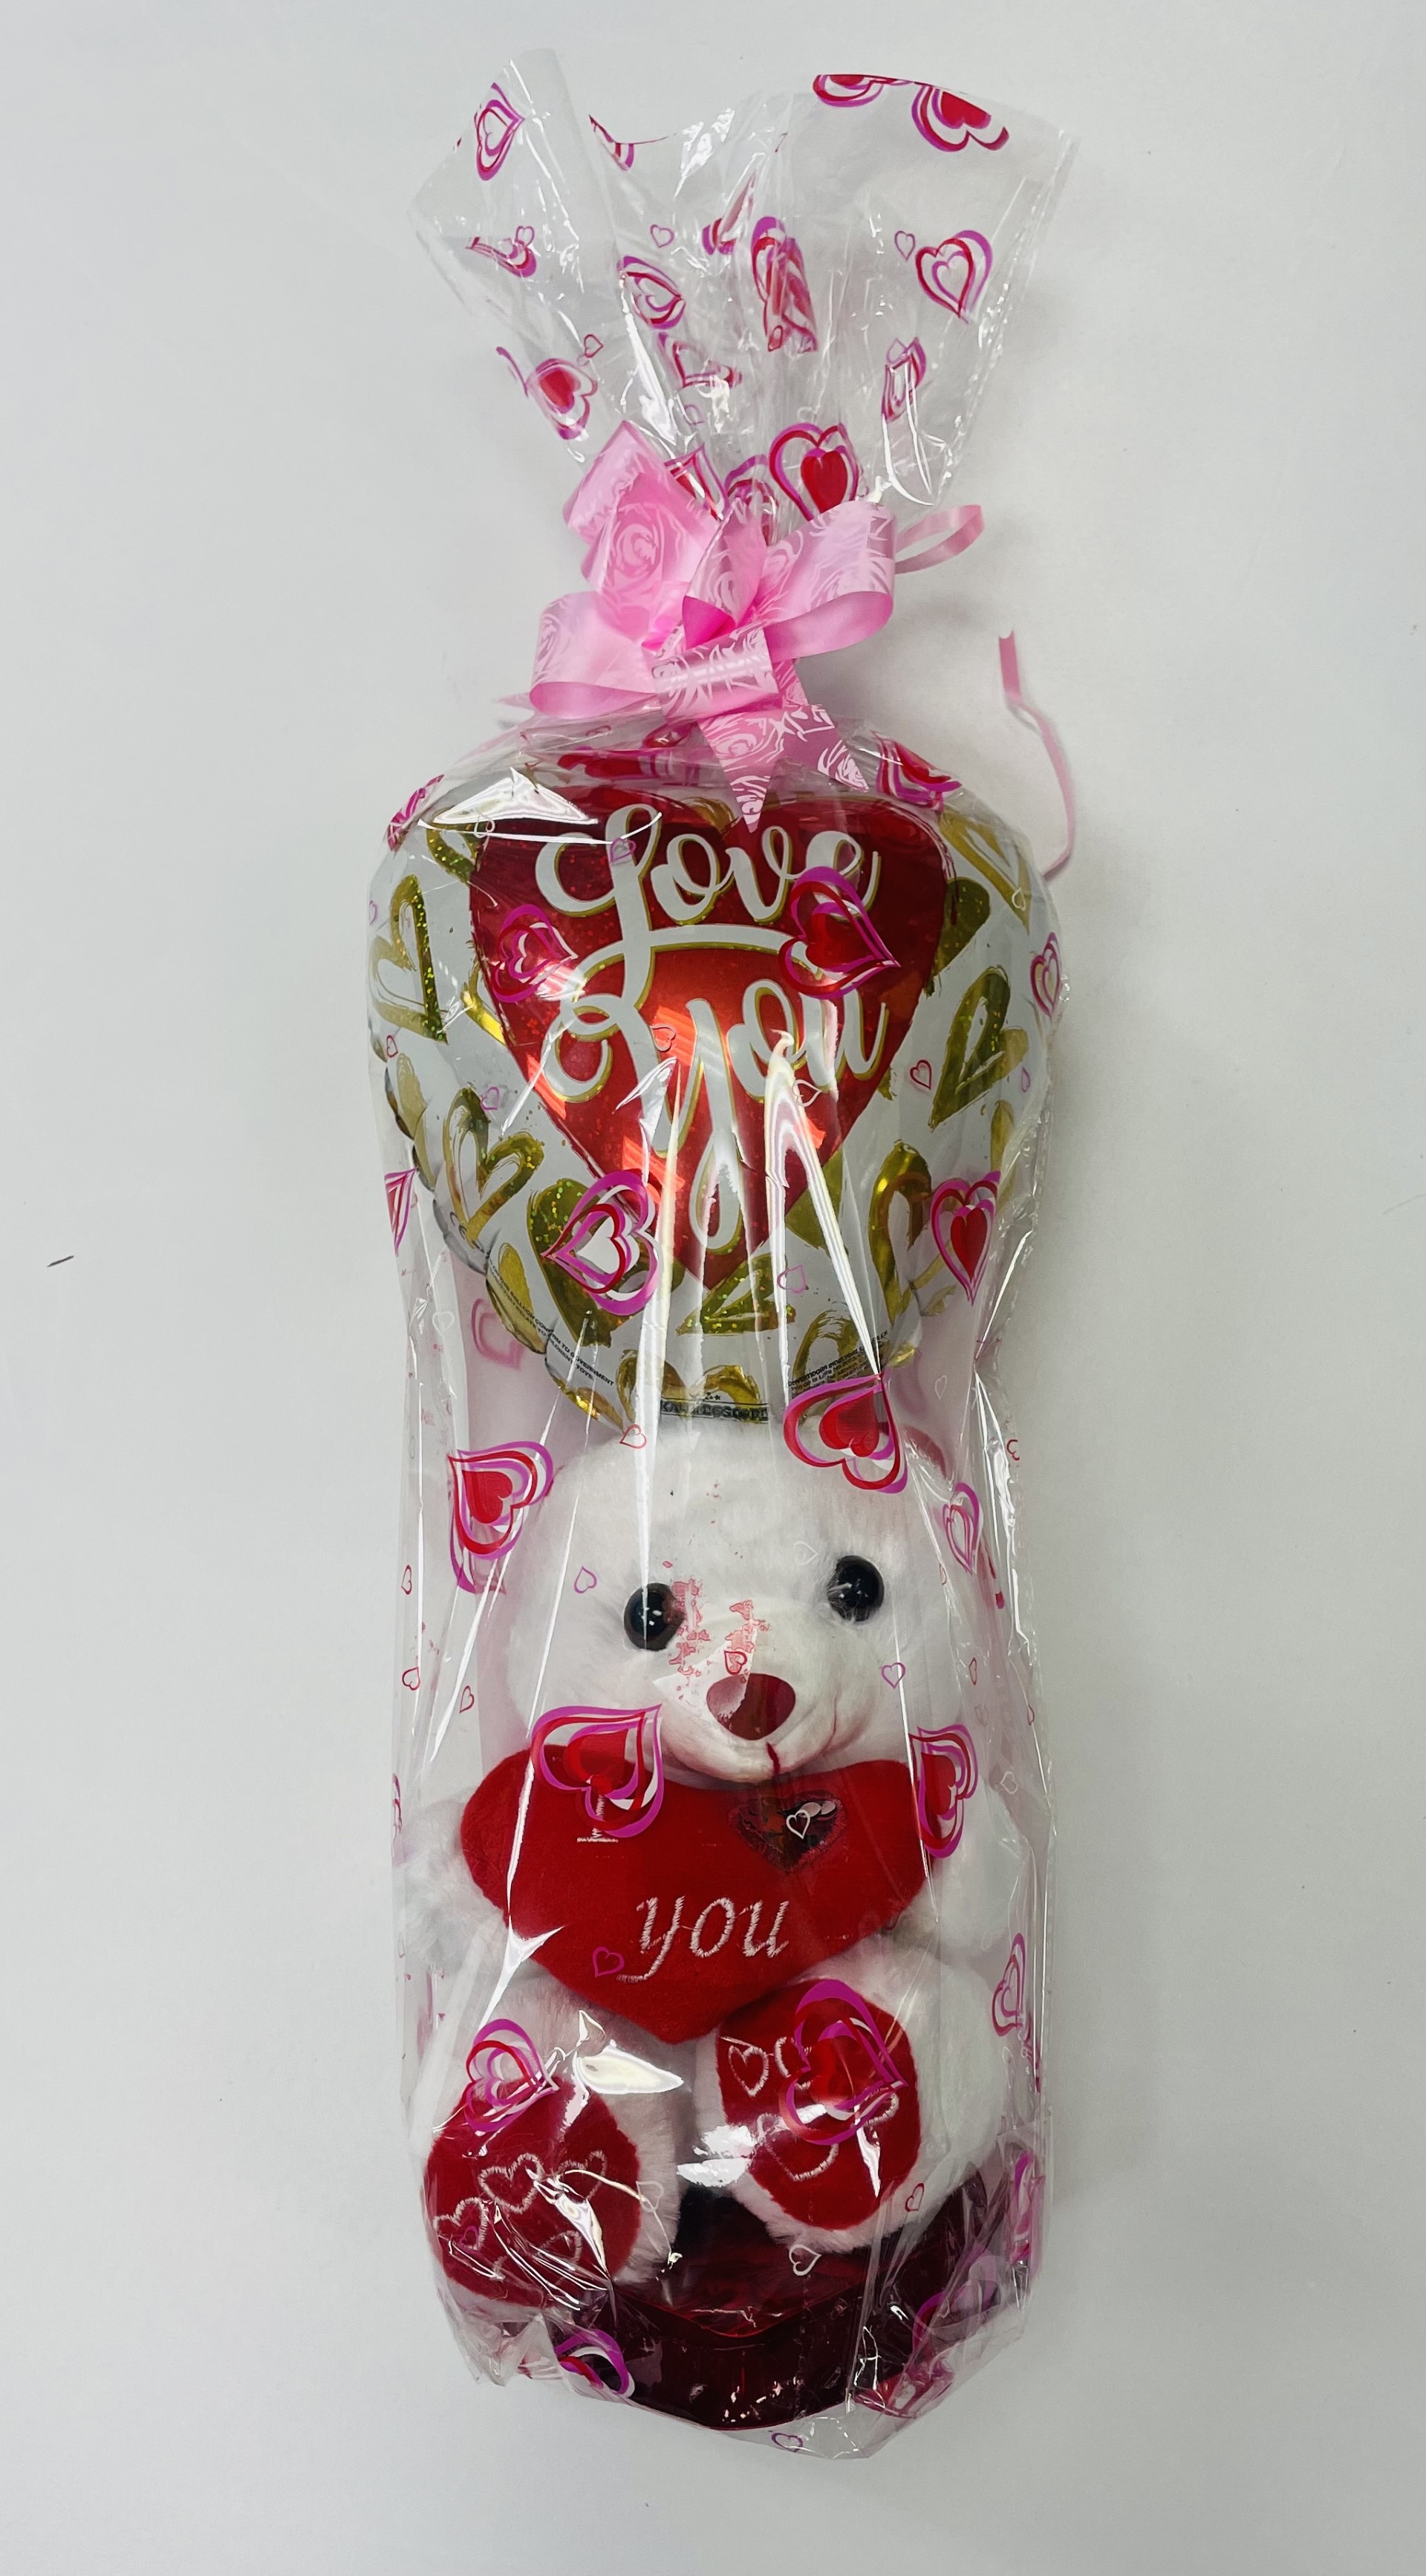 6 inch Bear Chocolate<br/>Quantity Available:100 pcs 